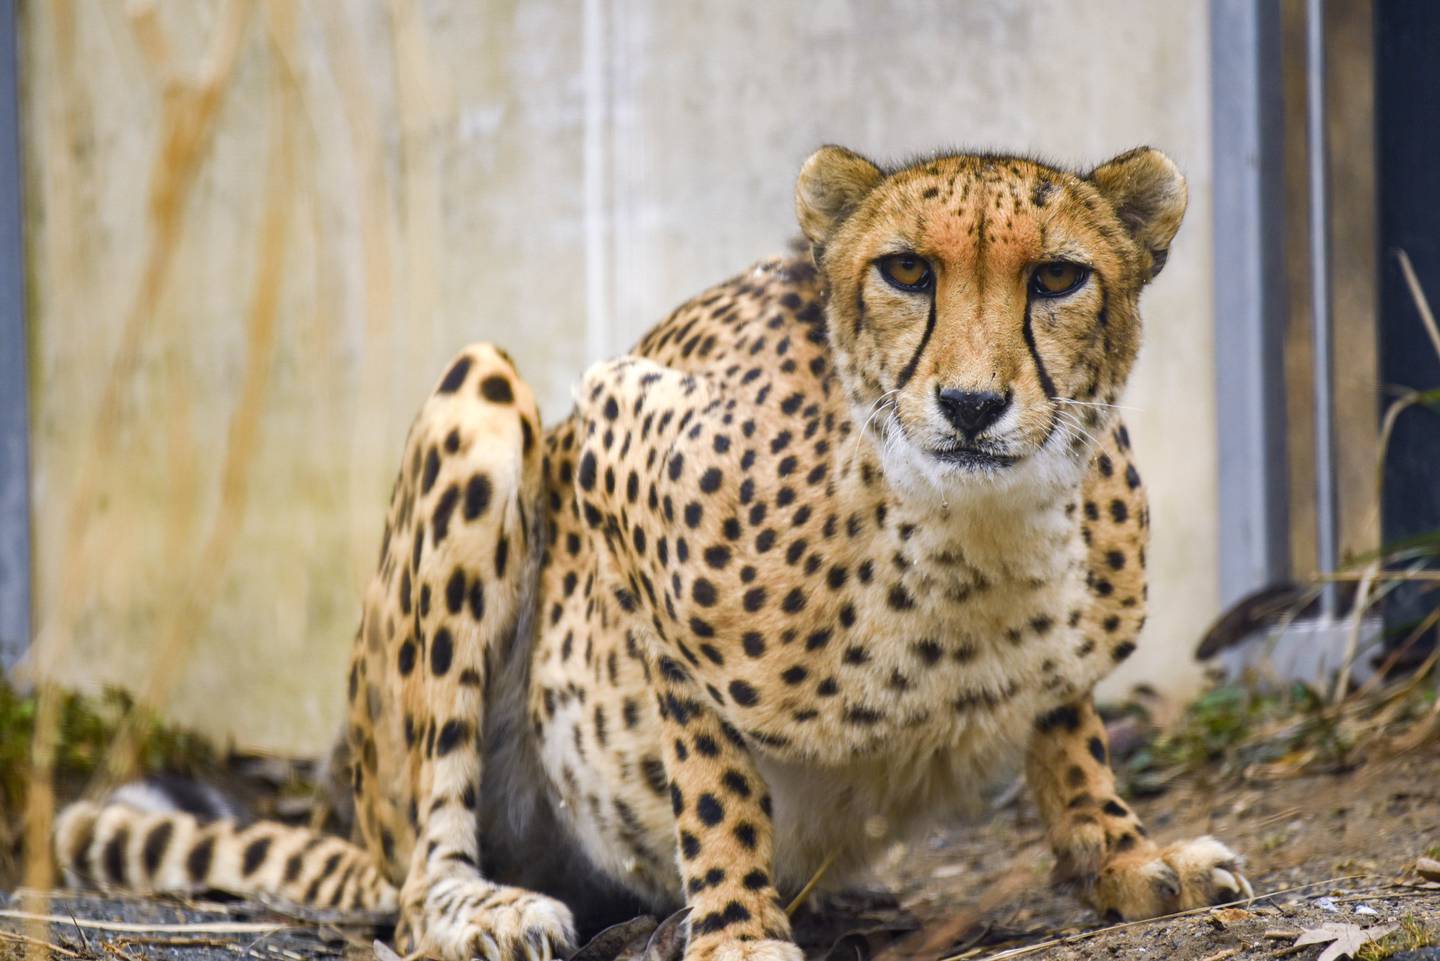 Bud the 8-year-old cheetah at the Maryland Zoo. Bud was euthanized in late February 2023 after a battle with a gastrointestinal illness.